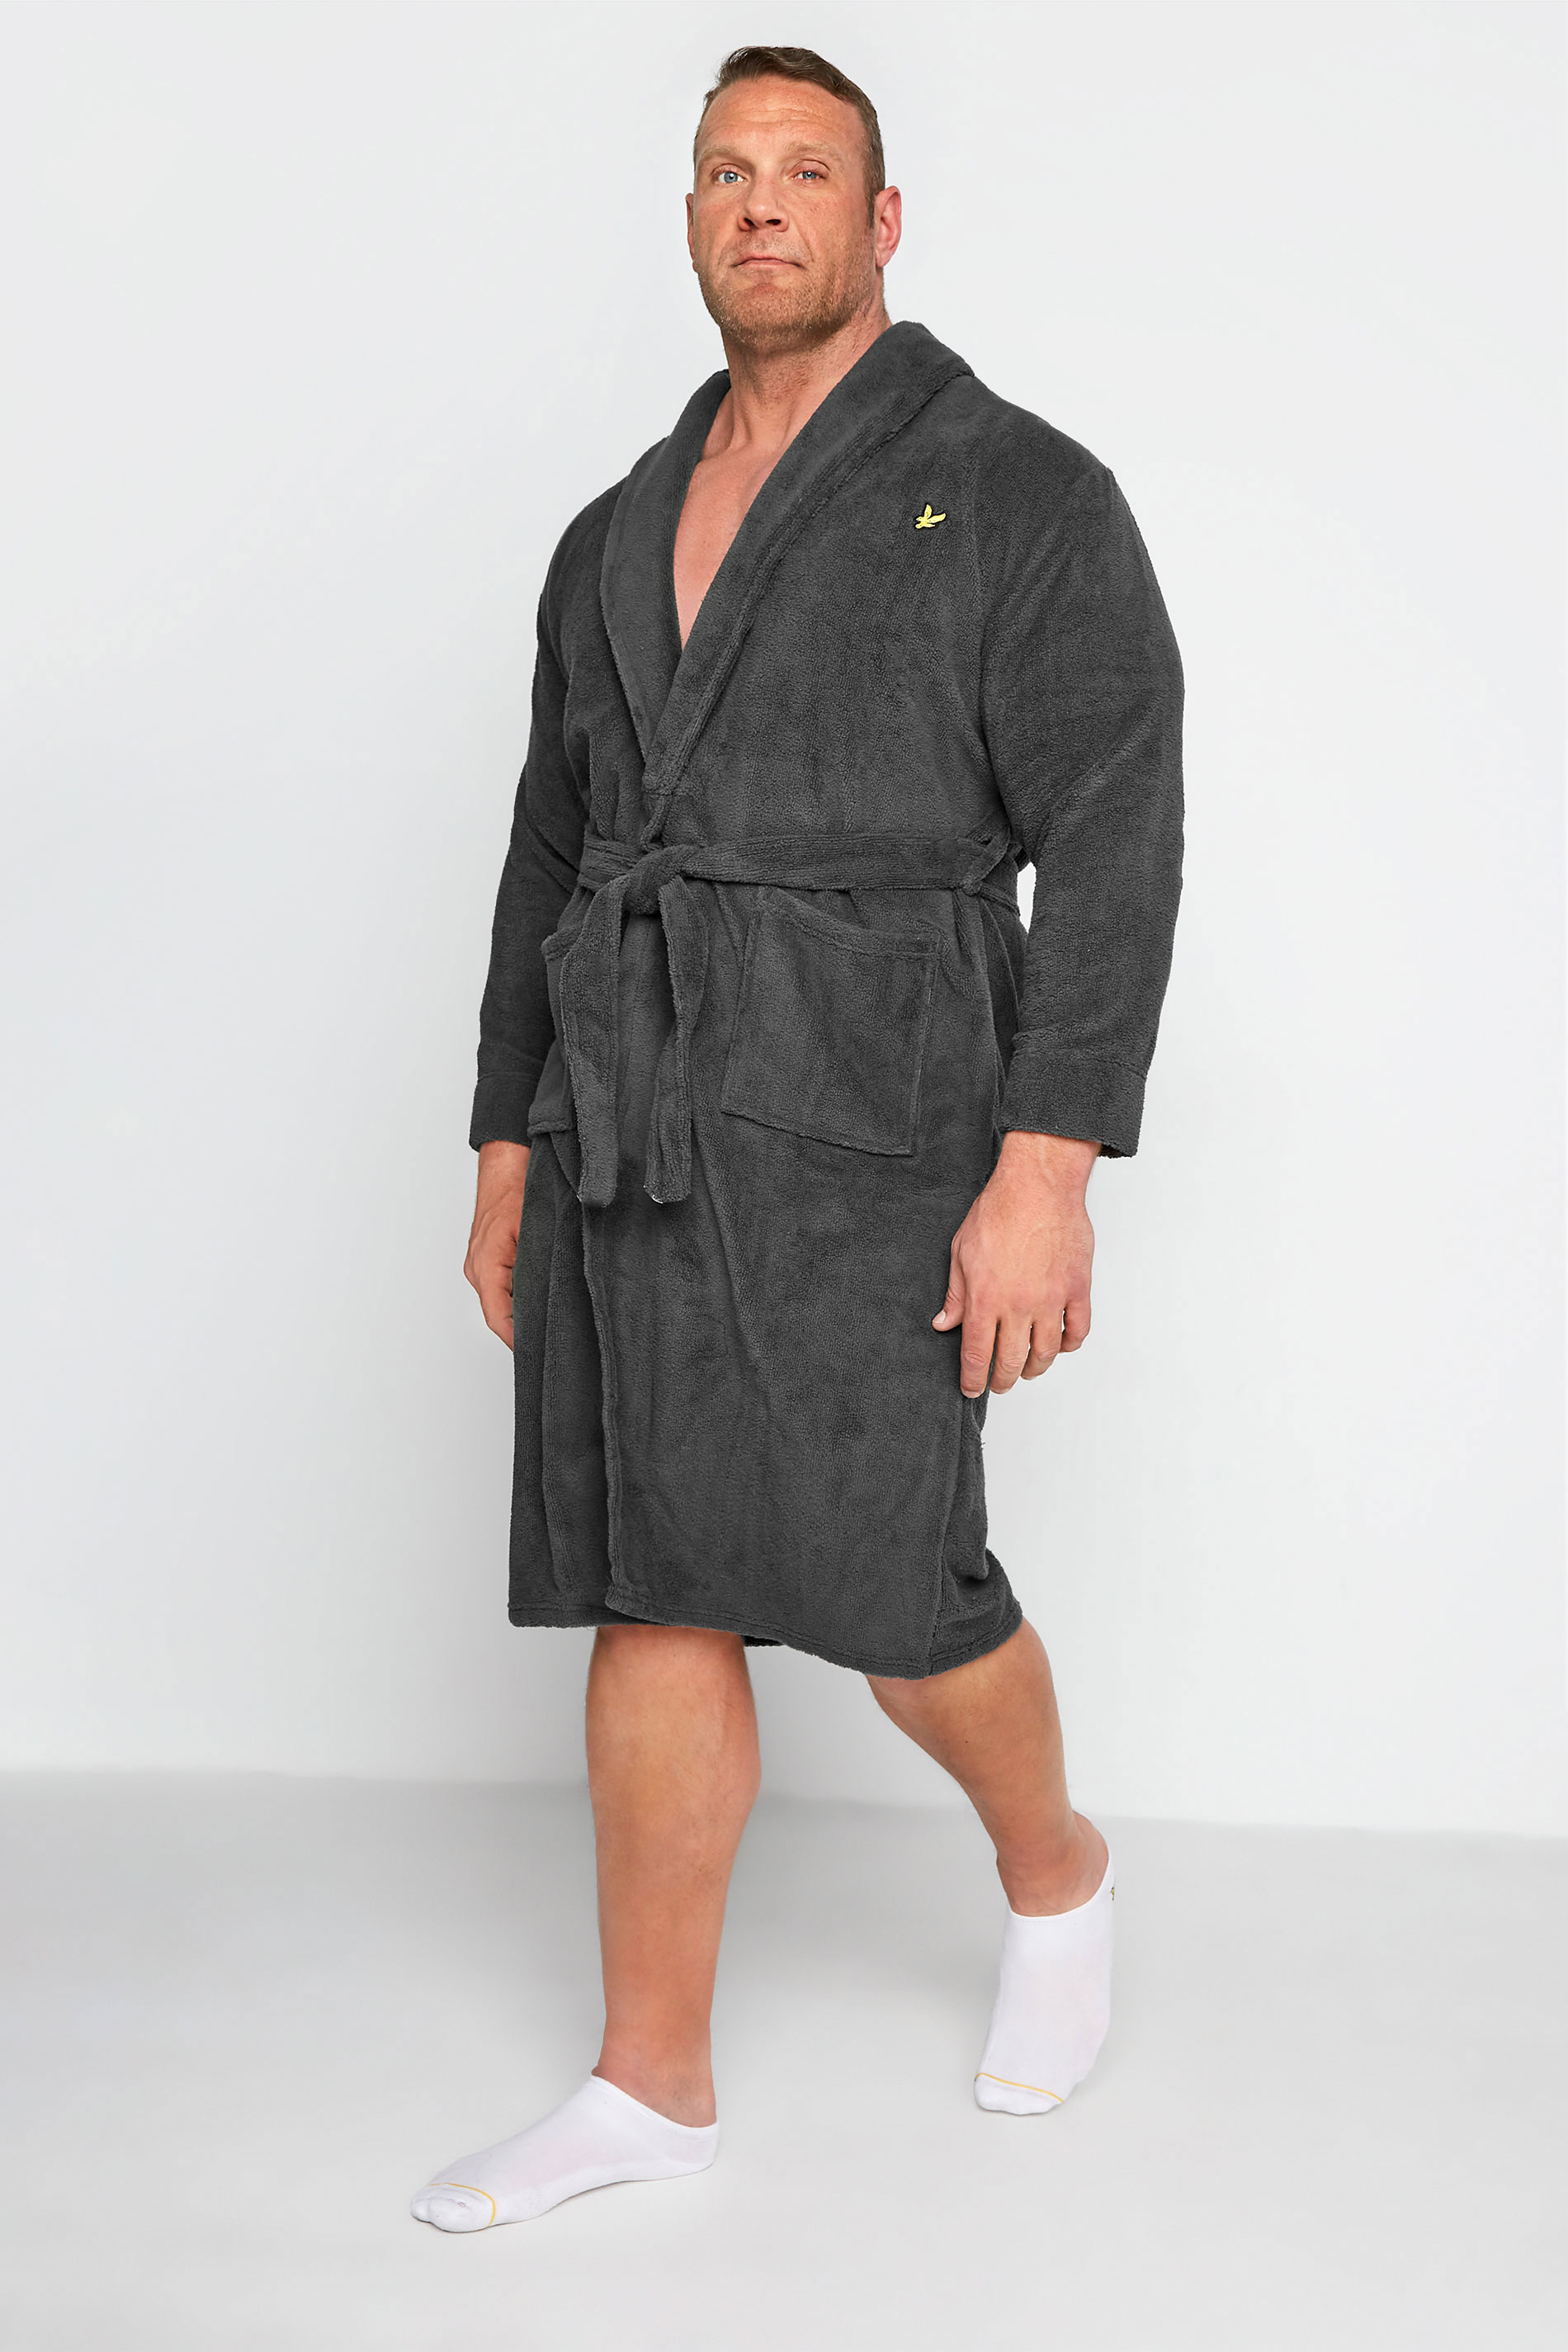 Image of Size 3Xl Mens Lyle & Scott Big & Tall Charcoal Grey Lucas Dressing Gown Big & Tall